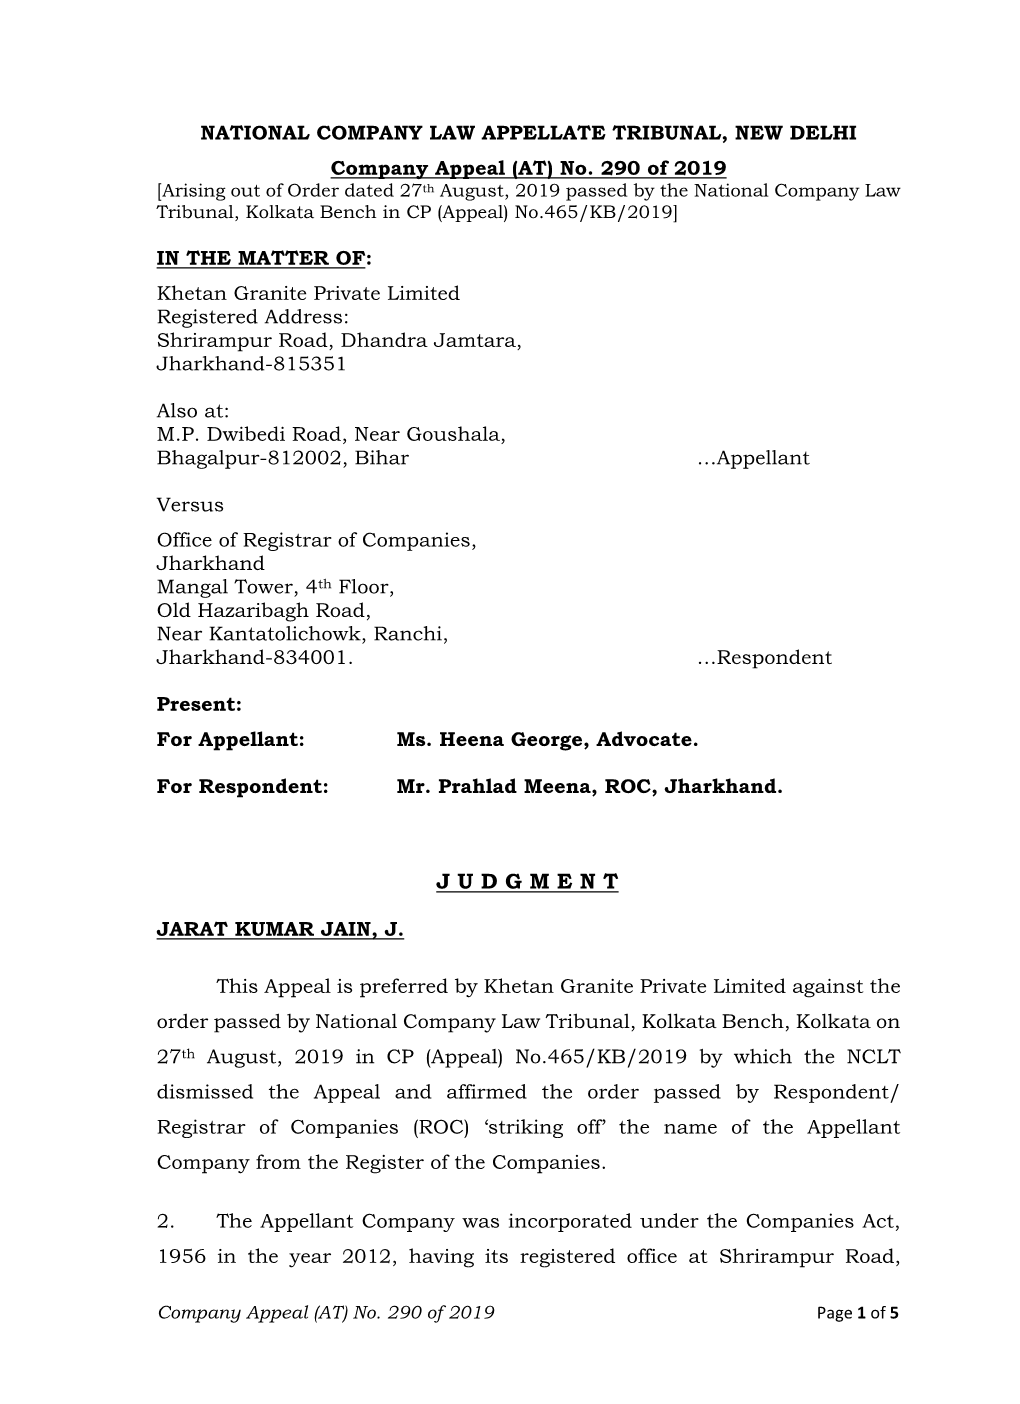 (AT) No. 290 of 2019 [Arising out of Order Dated 27Th August, 2019 Passed by the National Company Law Tribunal, Kolkata Bench in CP (Appeal) No.465/KB/2019]